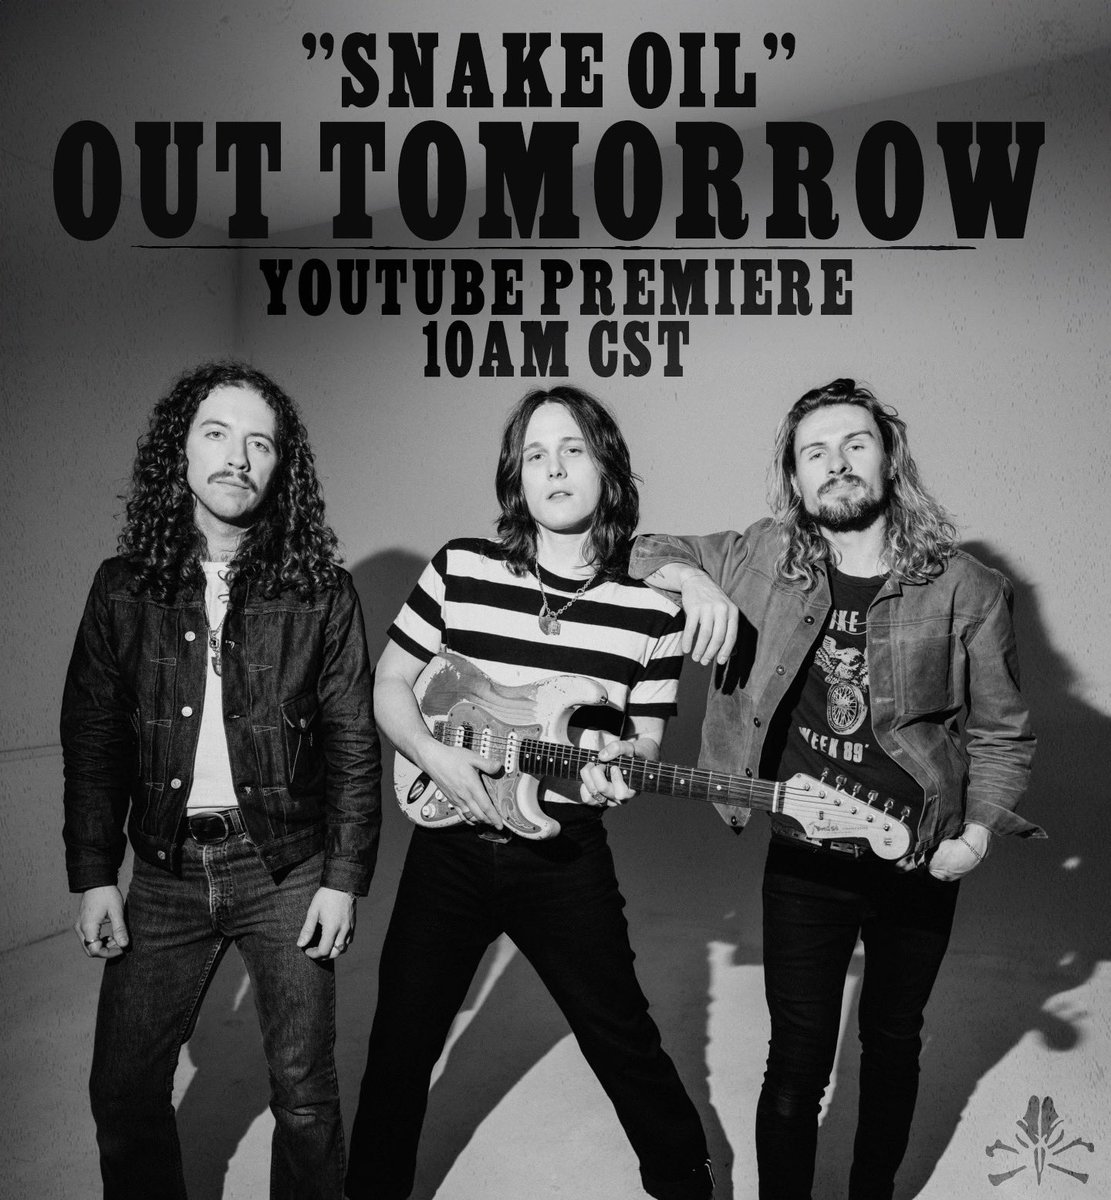 Our new single, “Snake Oil” comes out tomorrow! 🤘🏻